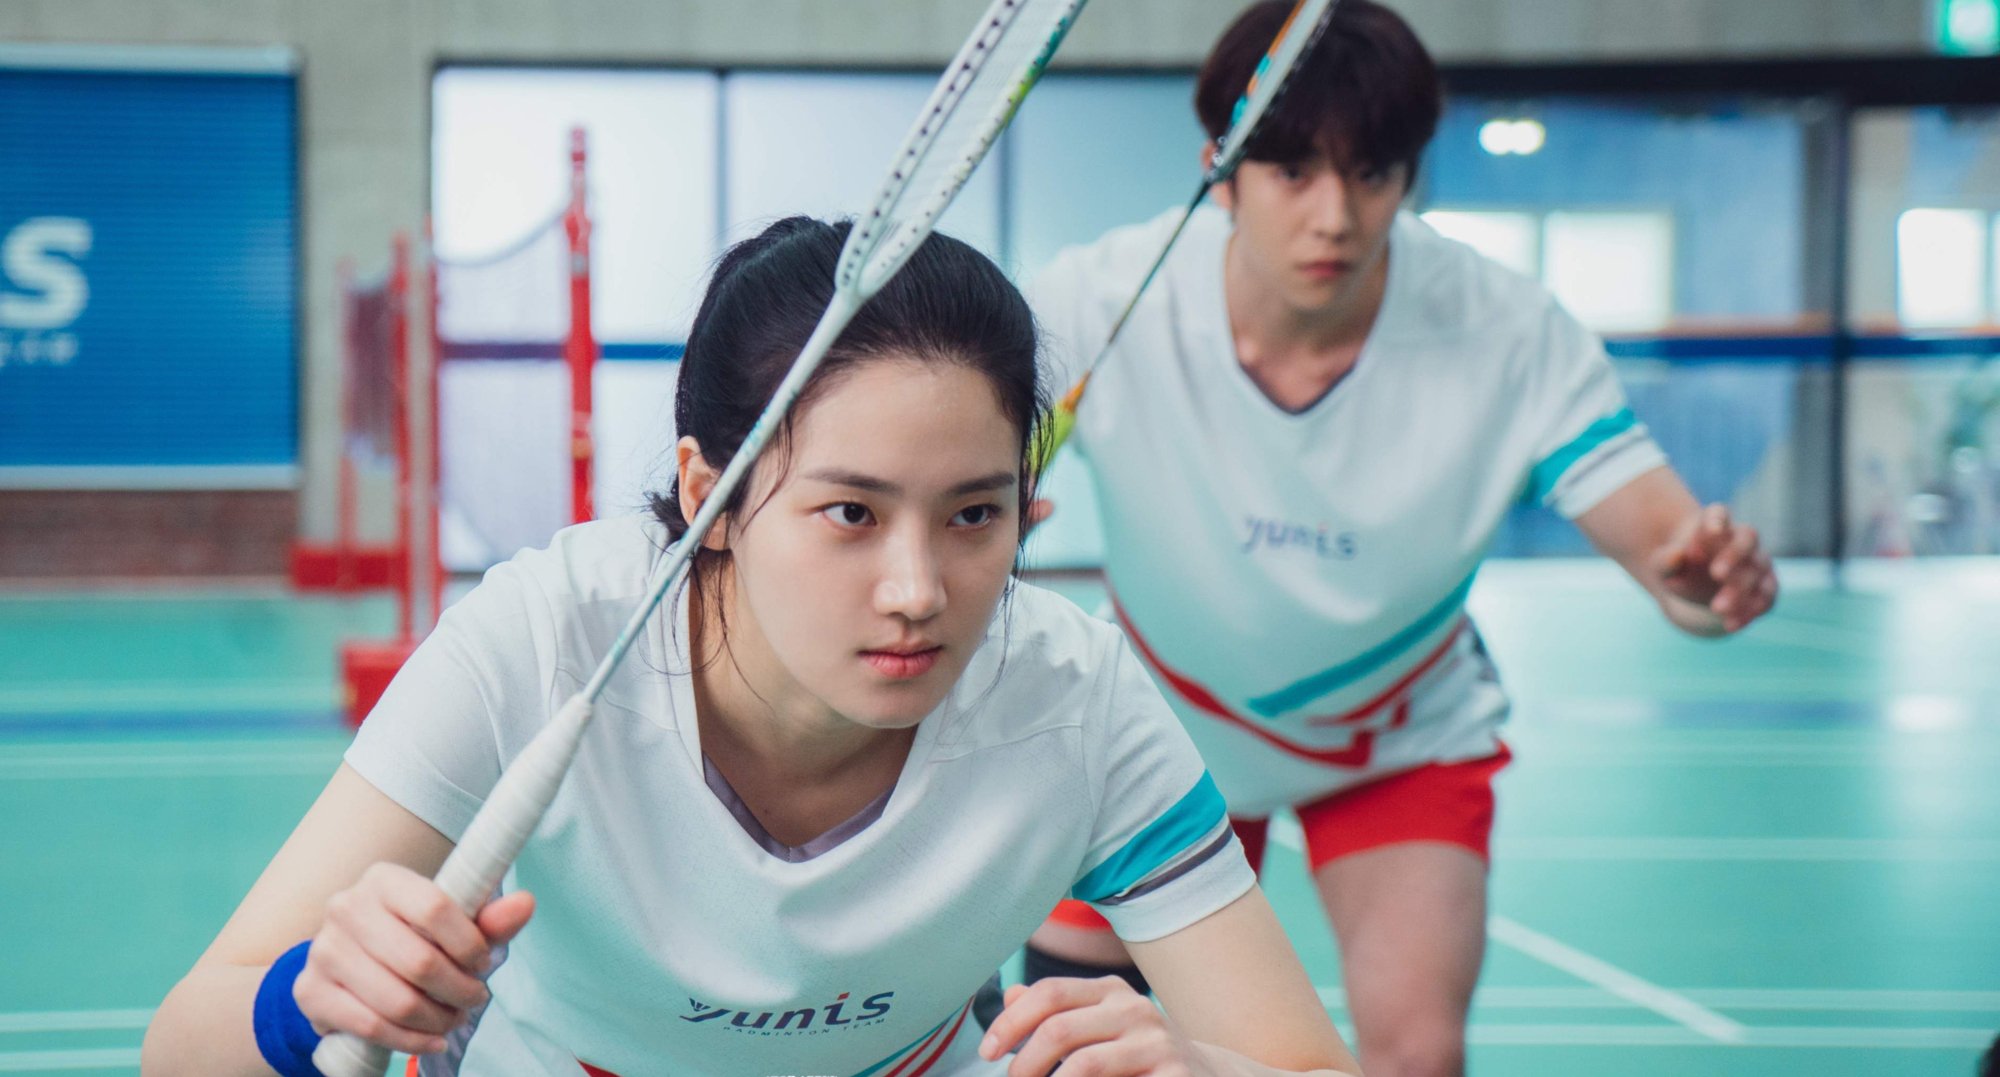 Actors Park Ju-hyun and Chae Jong-hyeop in sports romance K-drama 'Love All Play.'